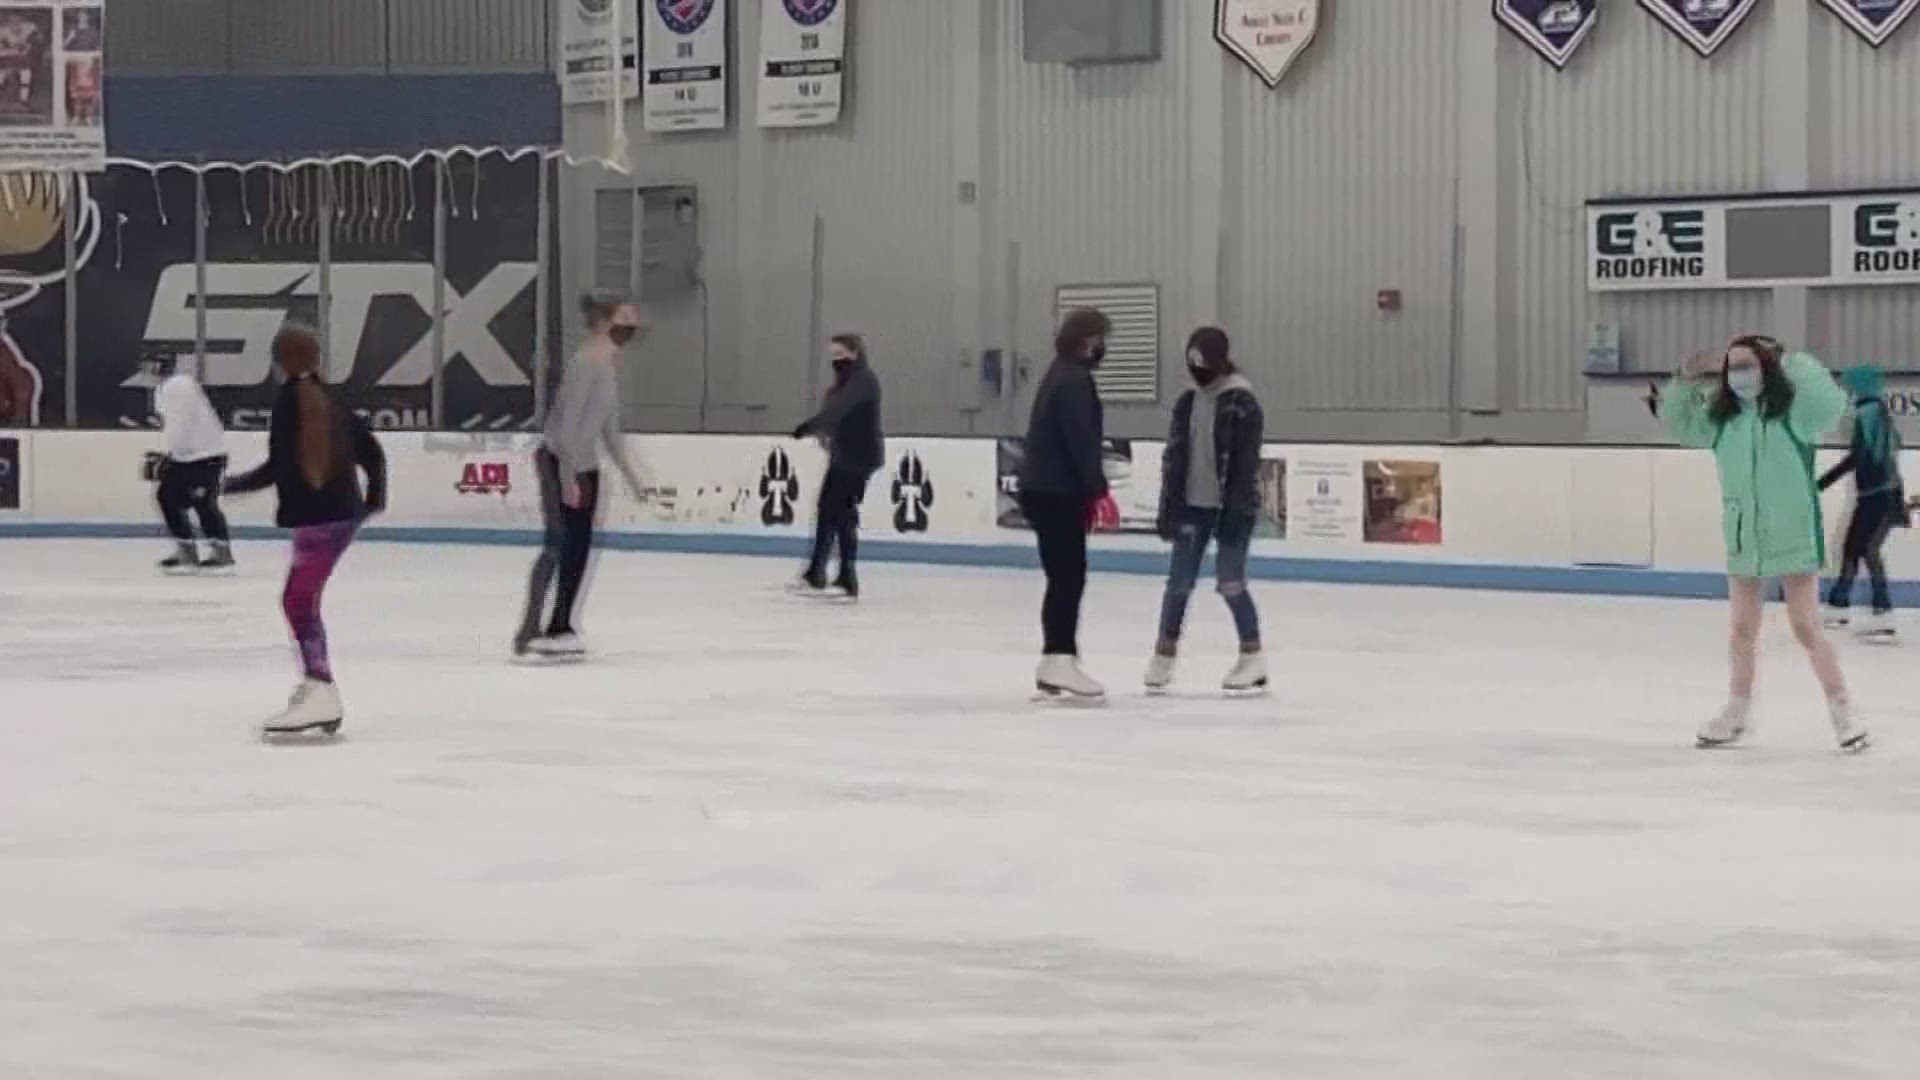 Learn to Skate looking for instructors, new figure skating director newscentermaine